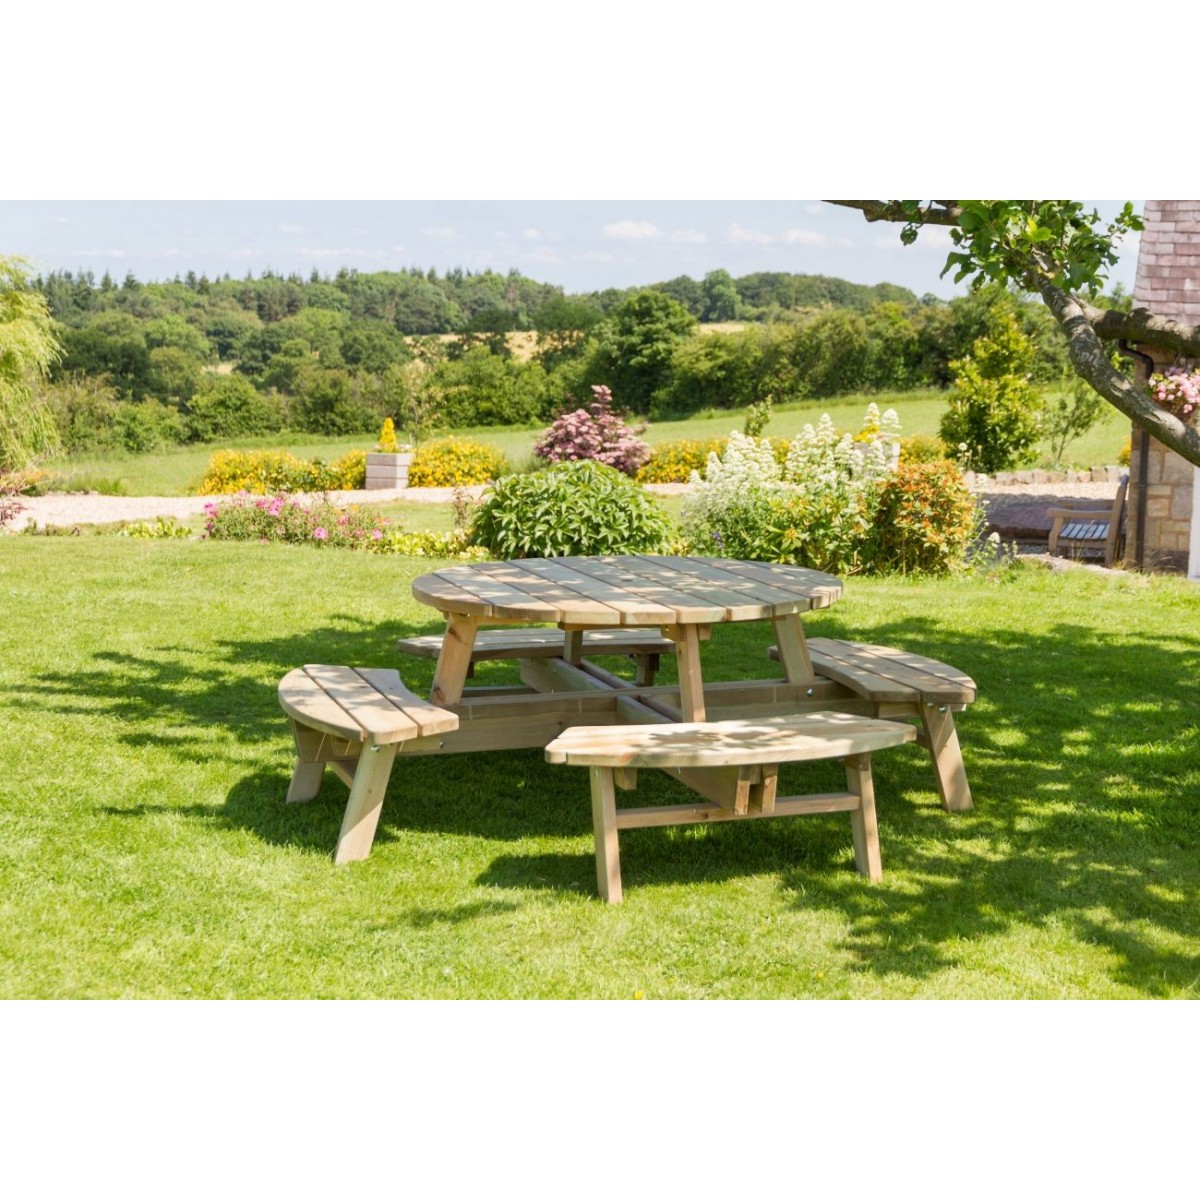 Large Round Wooden Picnic Table